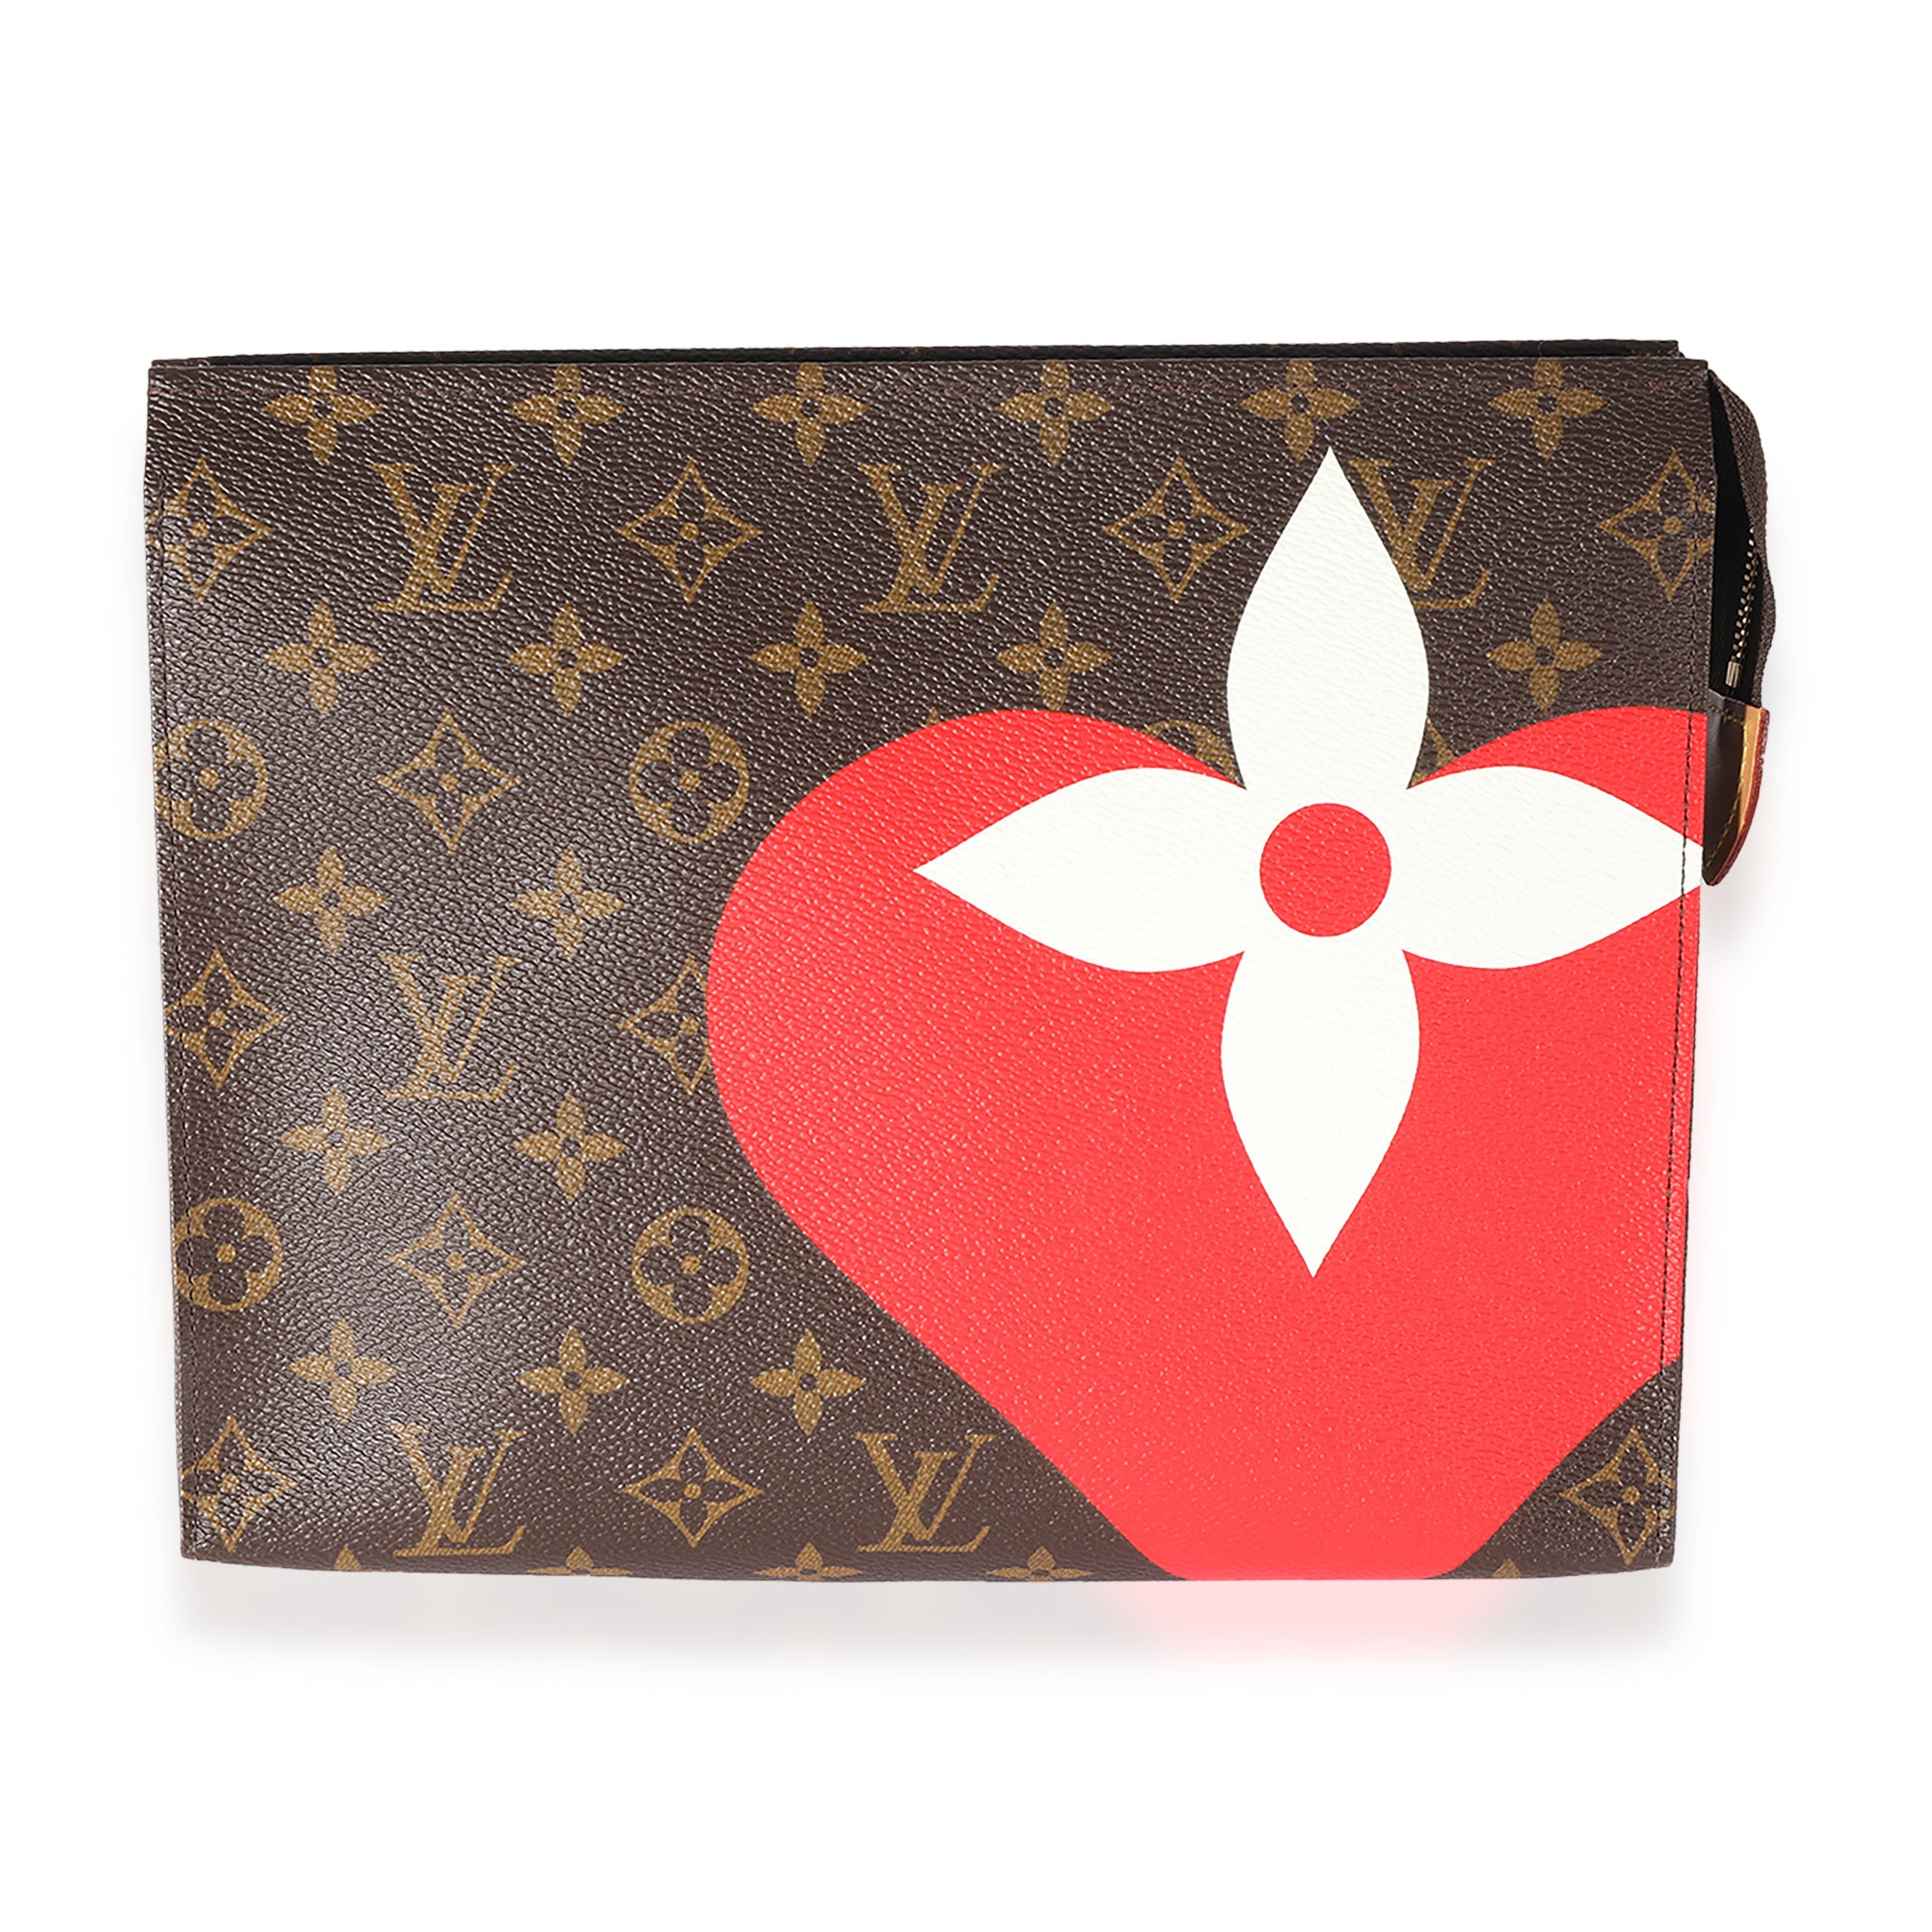 Louis Vuitton Game On Paper Bags